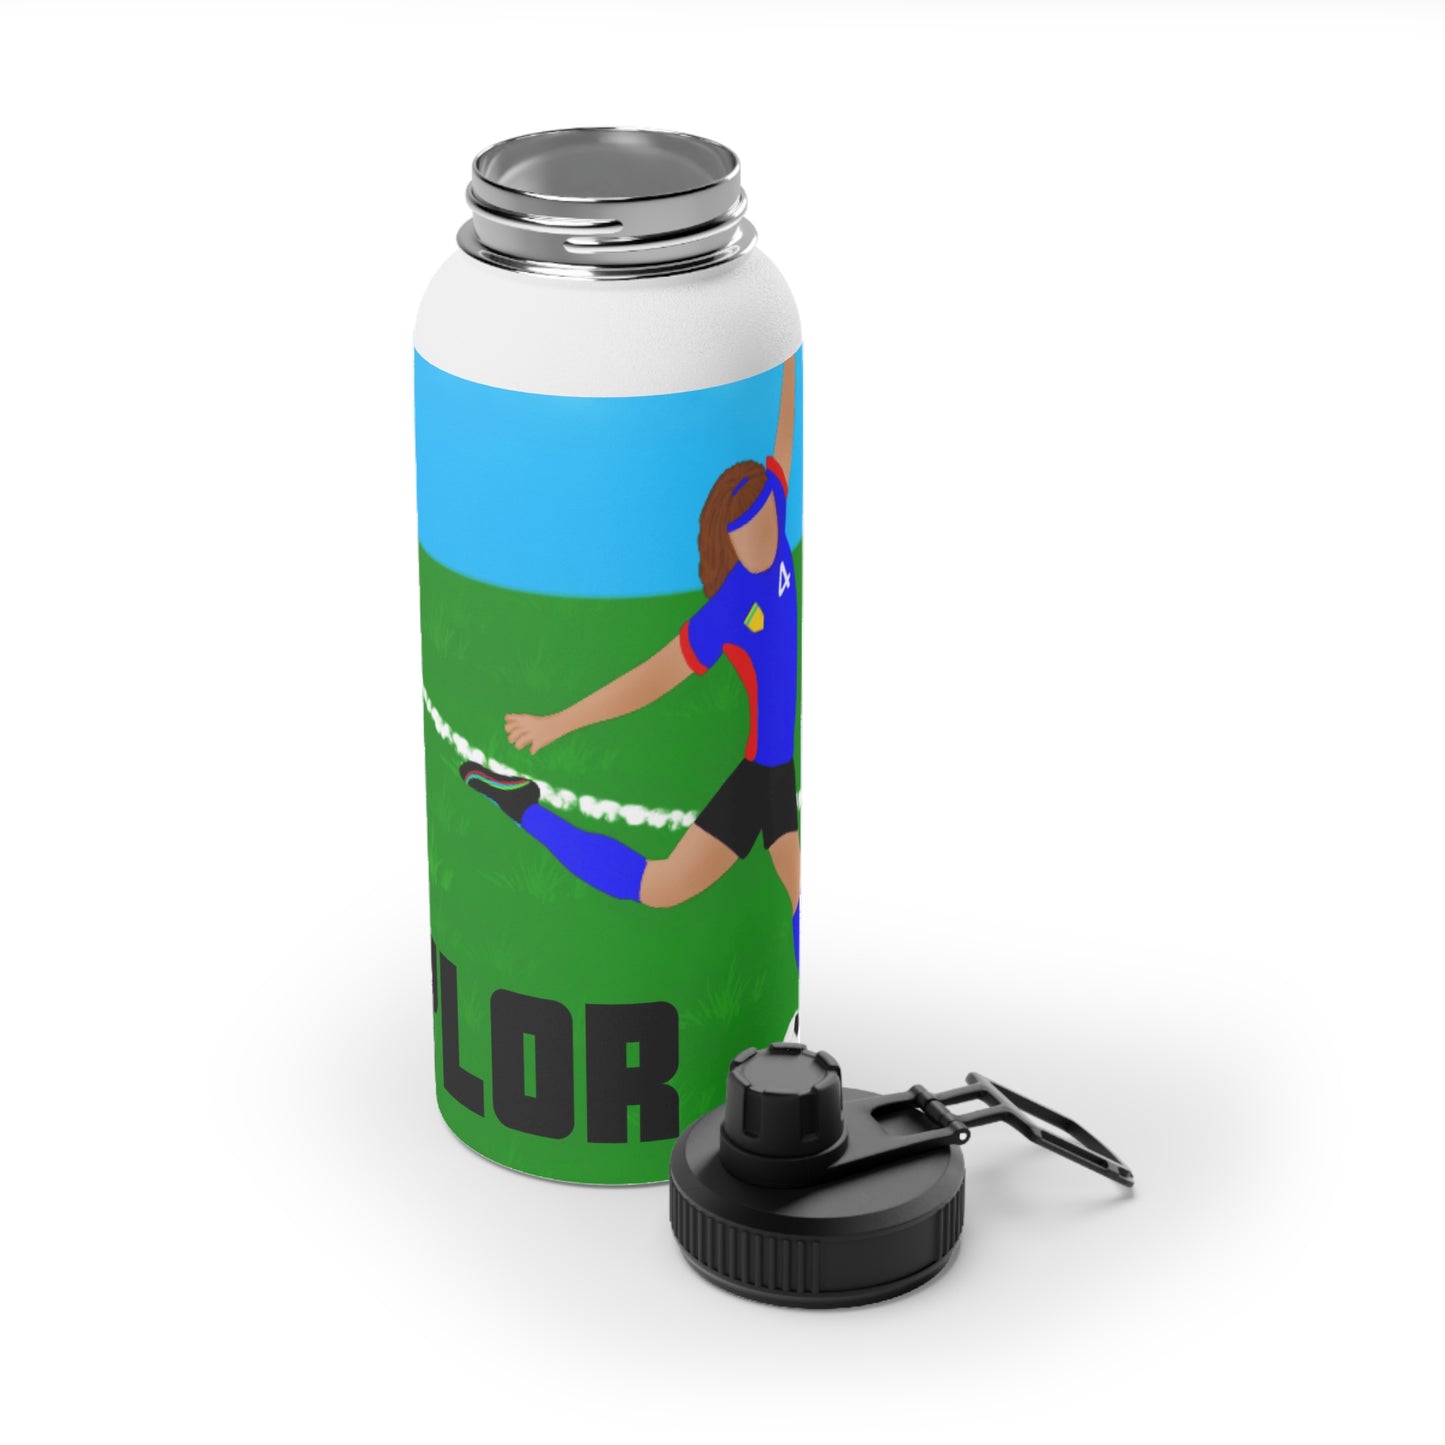 Active Cutie Soccer Stainless Steel Water Bottle (PICK YOUR SKIN TONE)